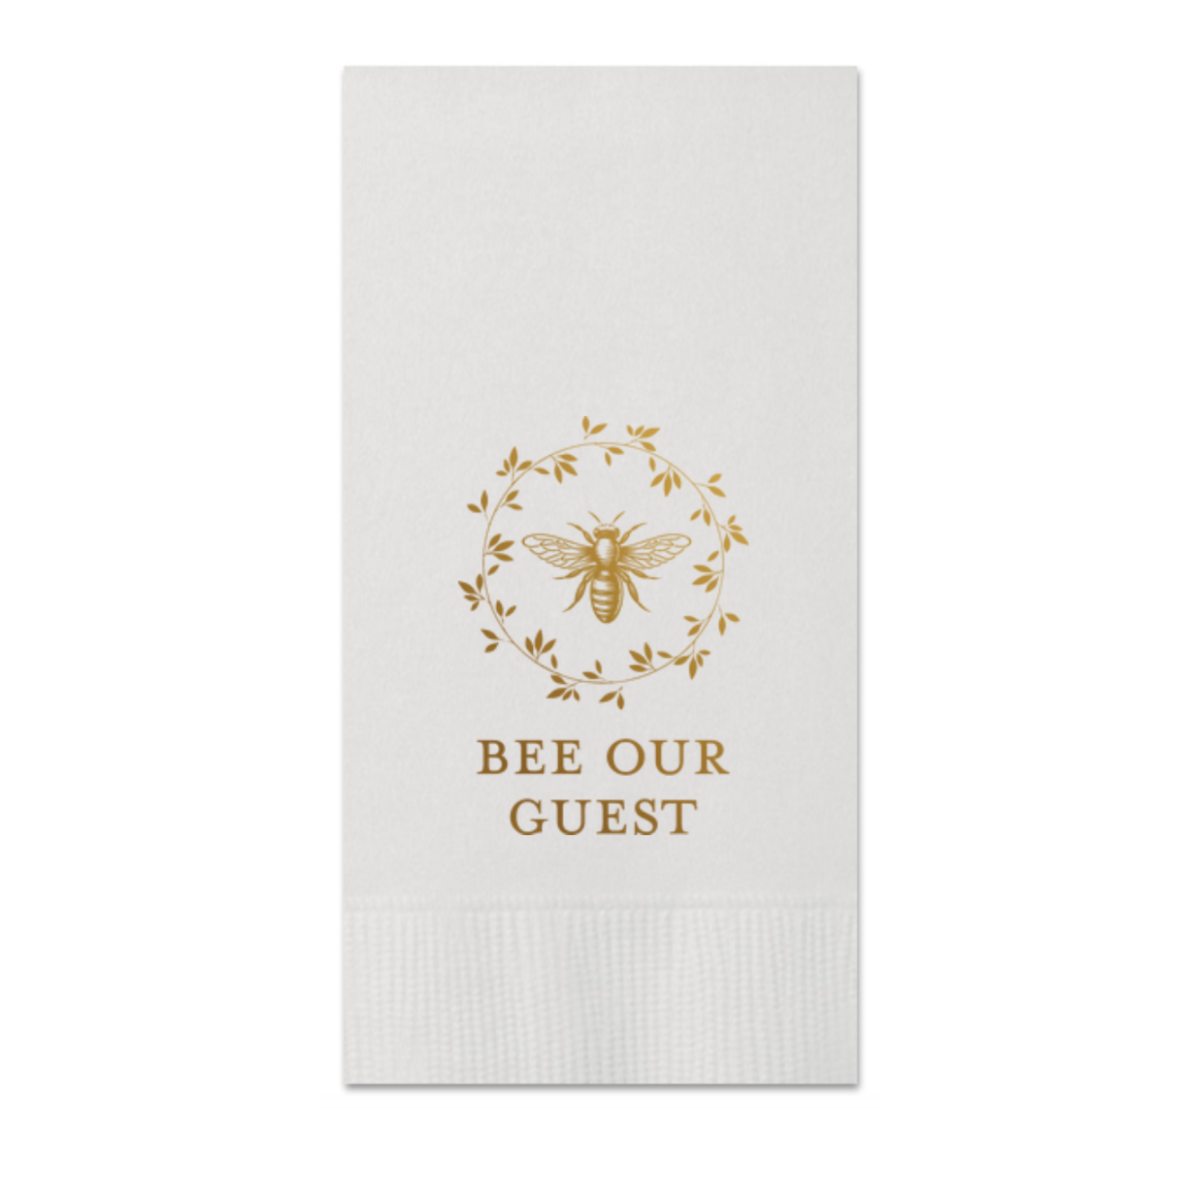 "Bee Our Guest" Paper Guest Towels, Set of 20